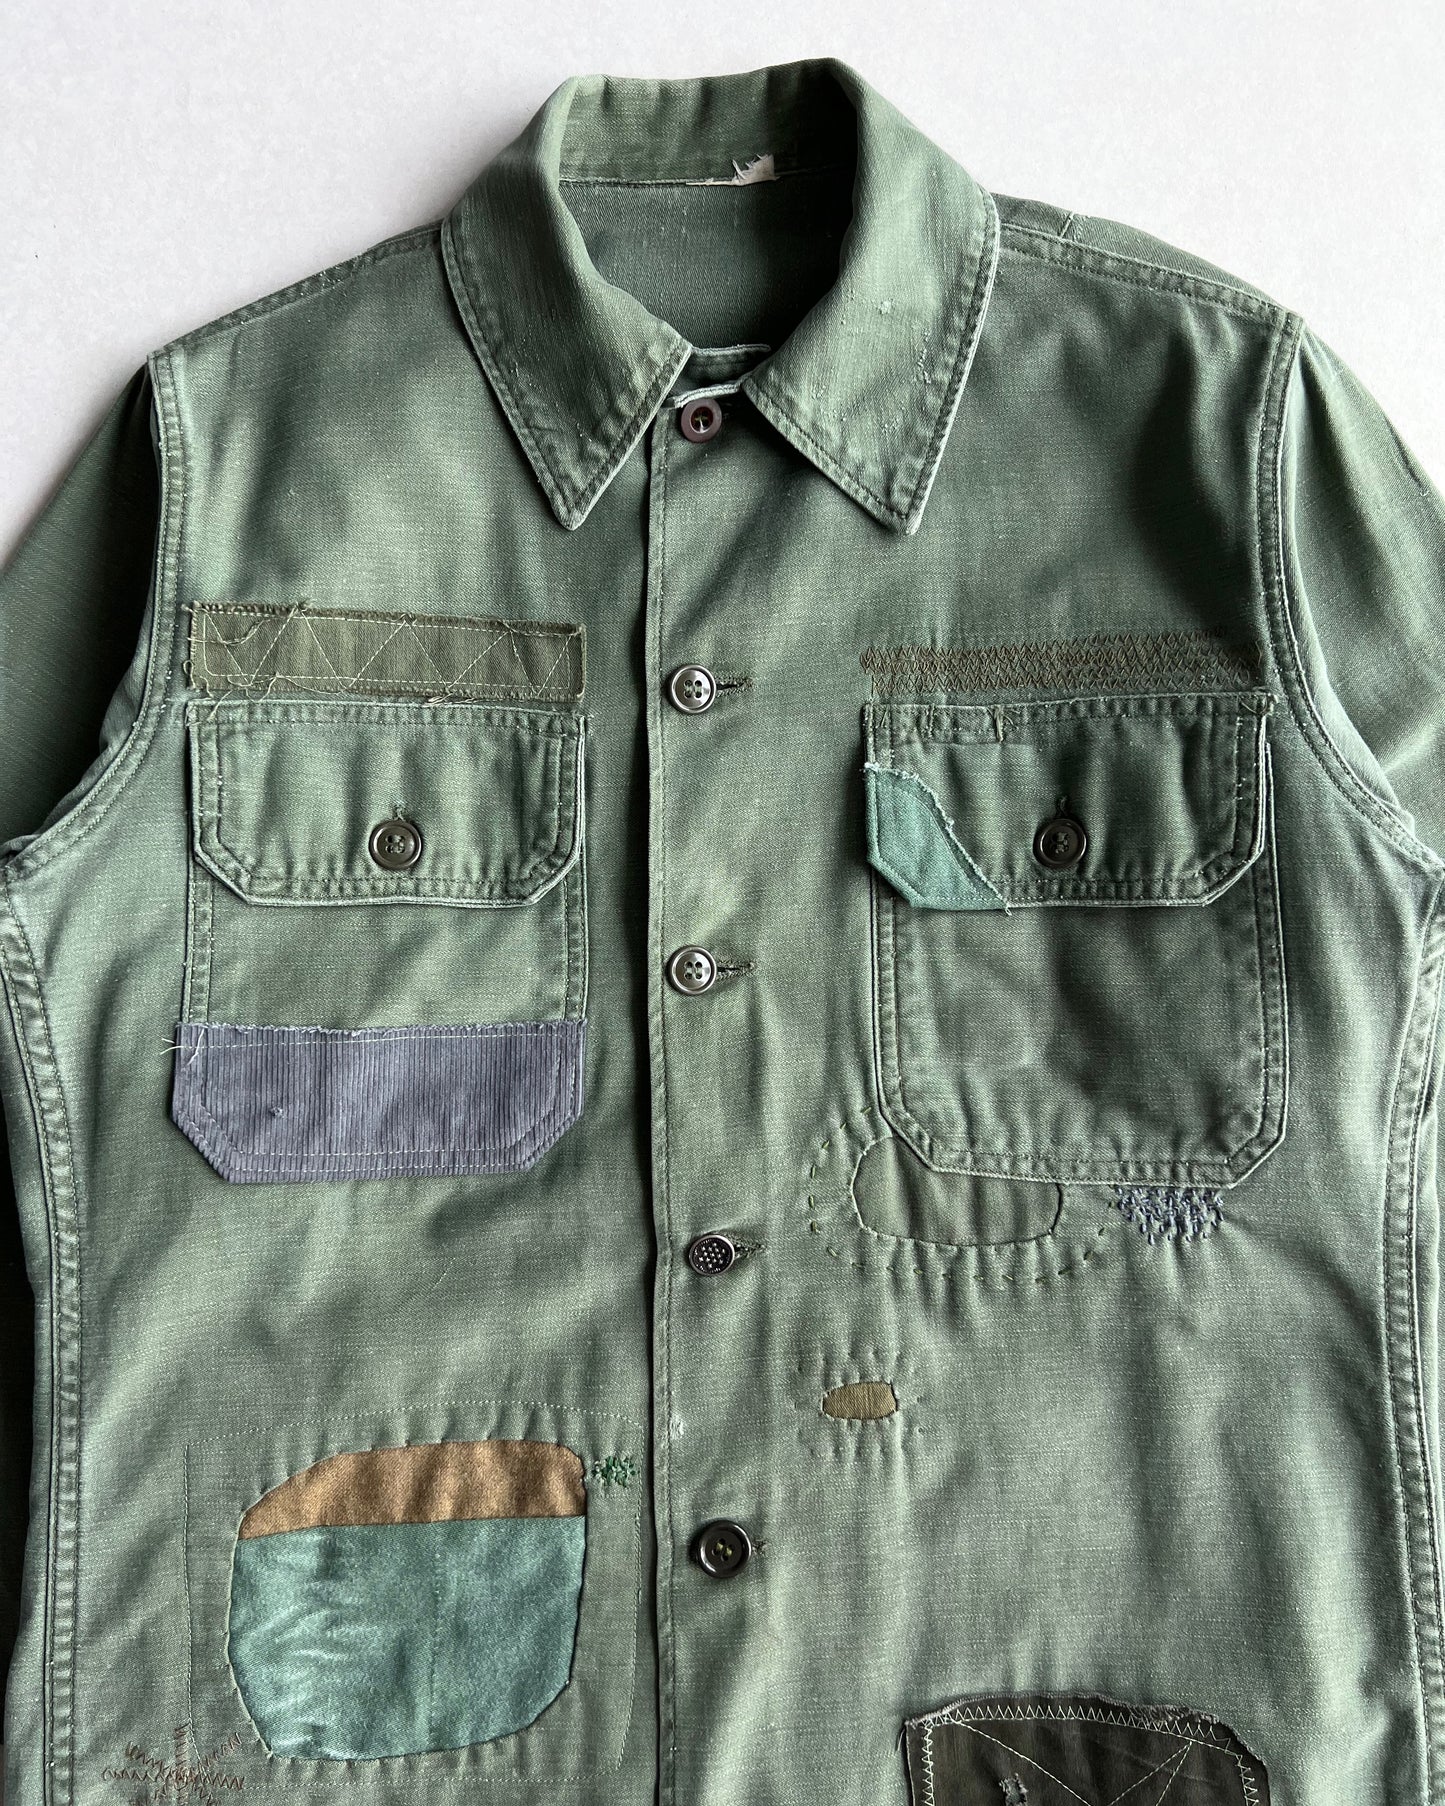 1960S US ARMY OG-107 P63 REPAIRED FATIGUE SHIRT (M)